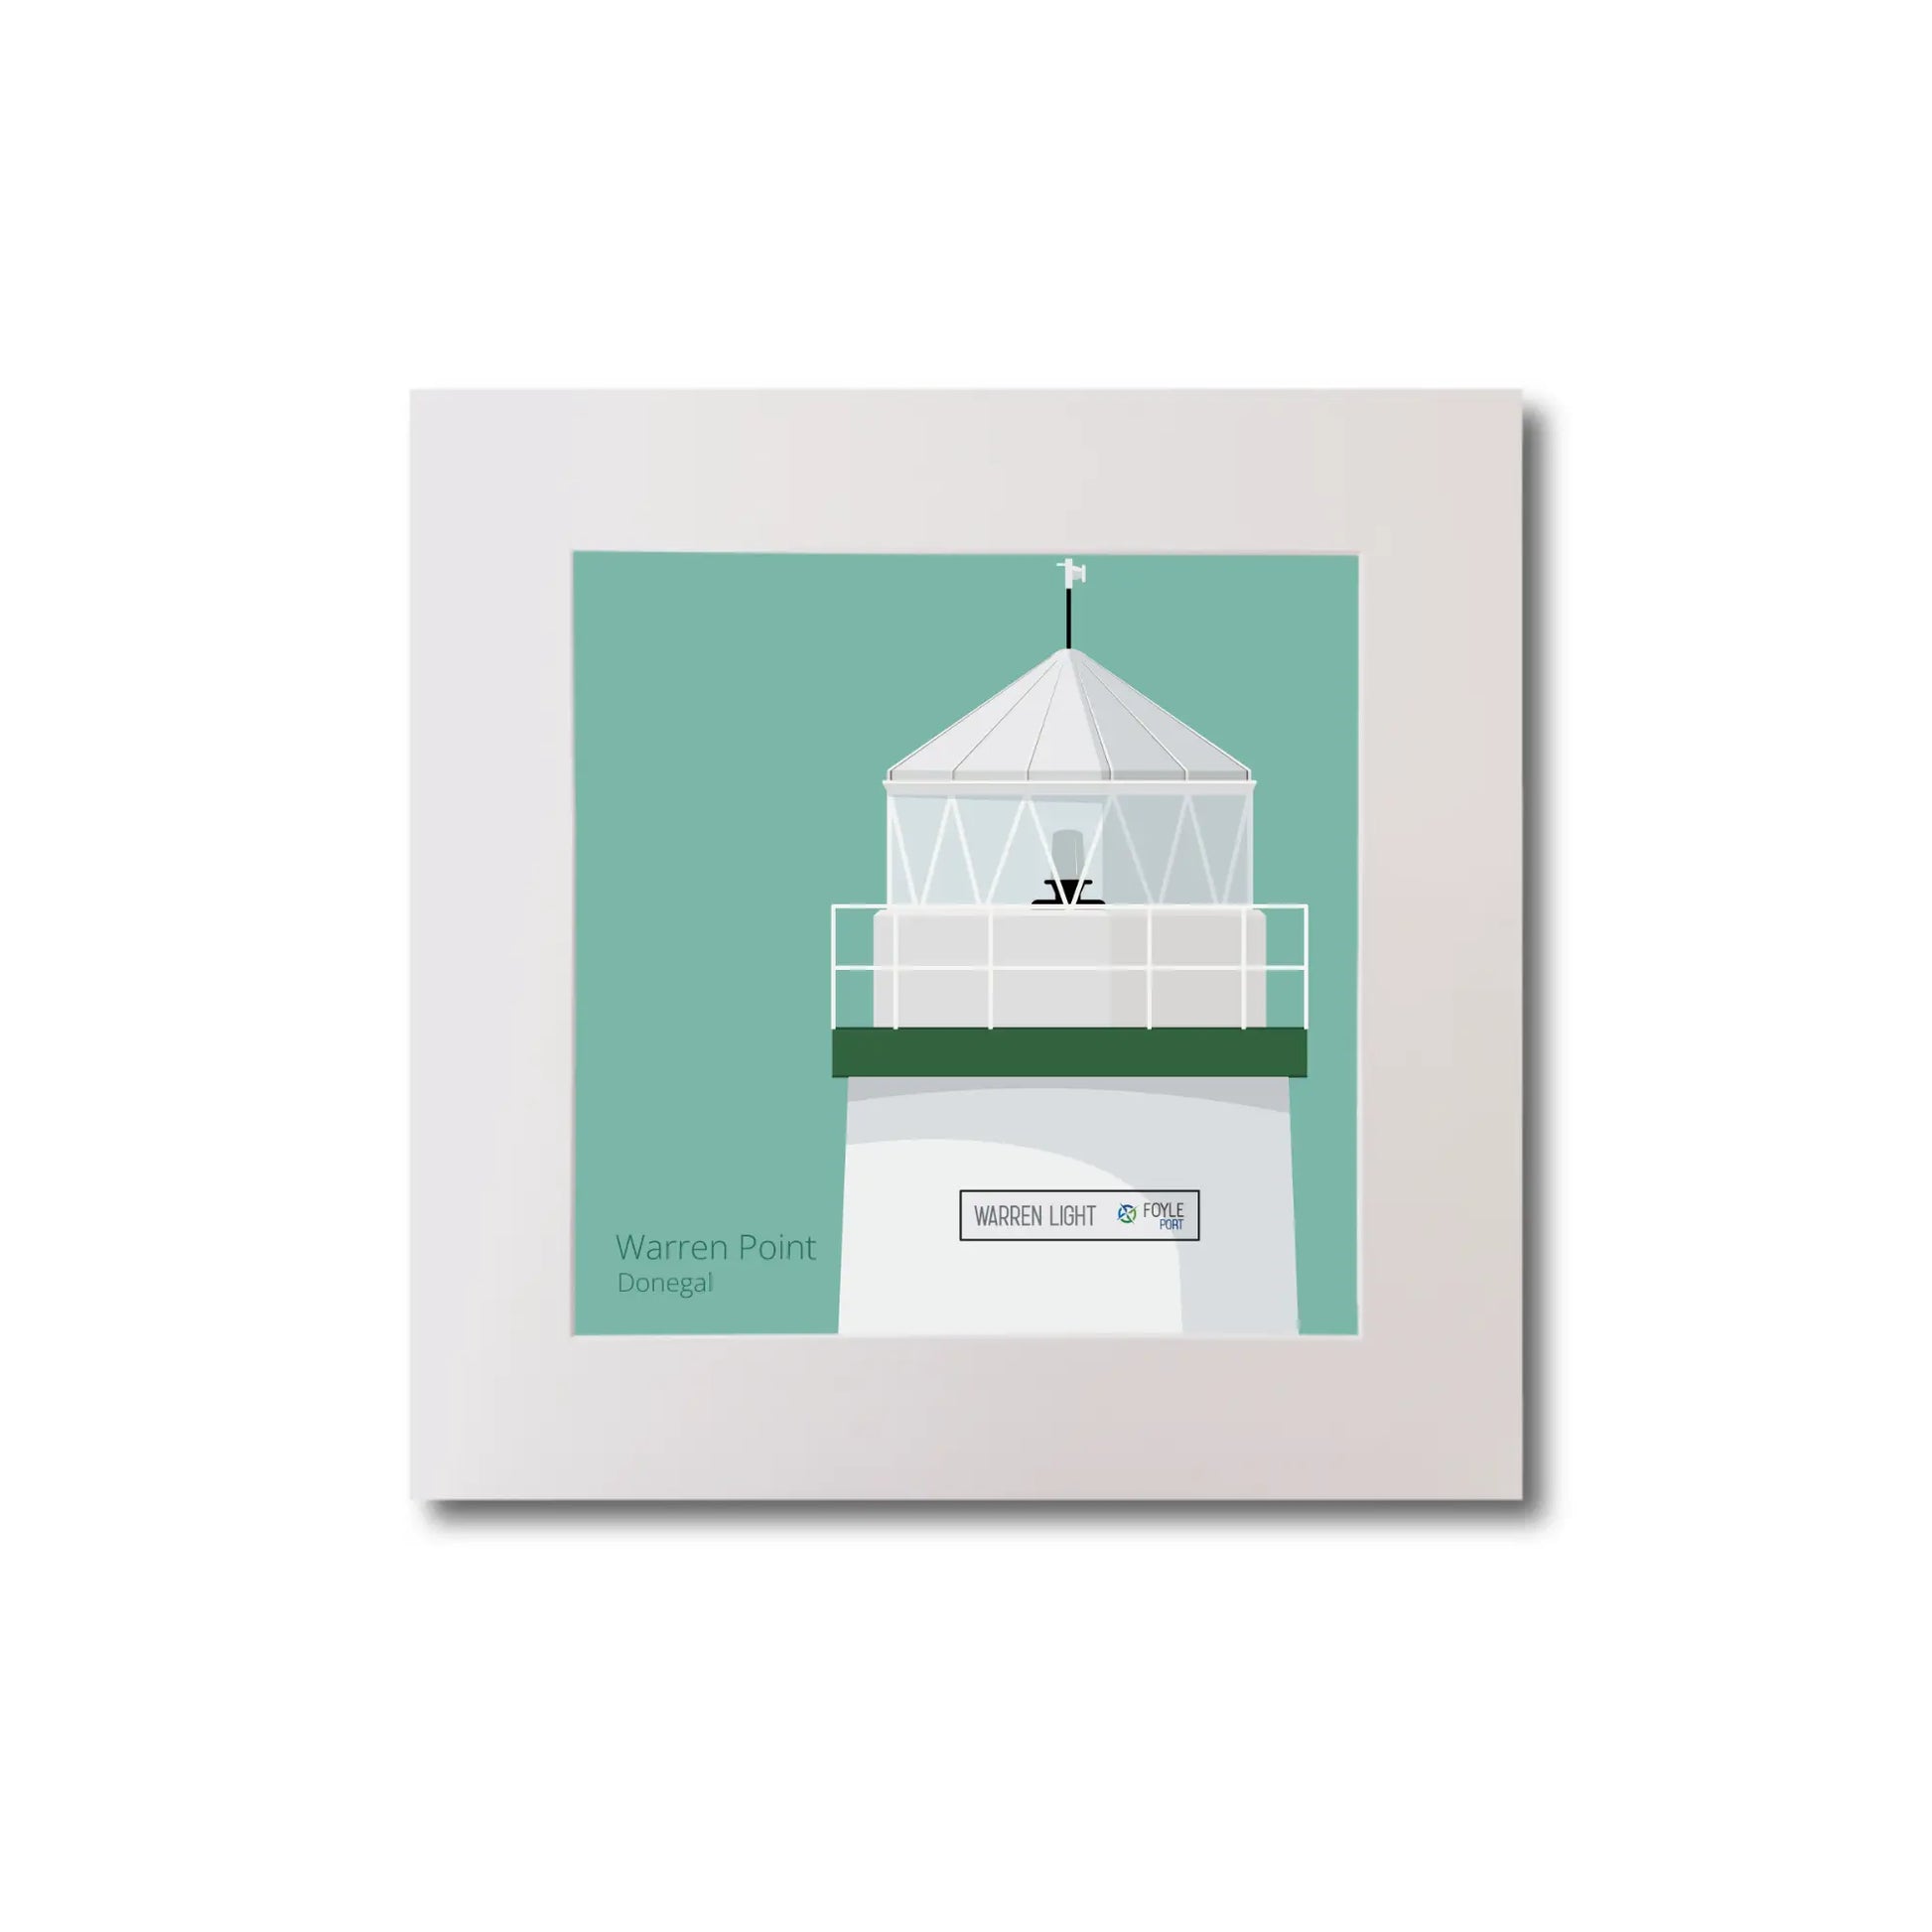 Illustration  Warren Point lighthouse on an ocean green background, mounted and measuring 20x20cm.